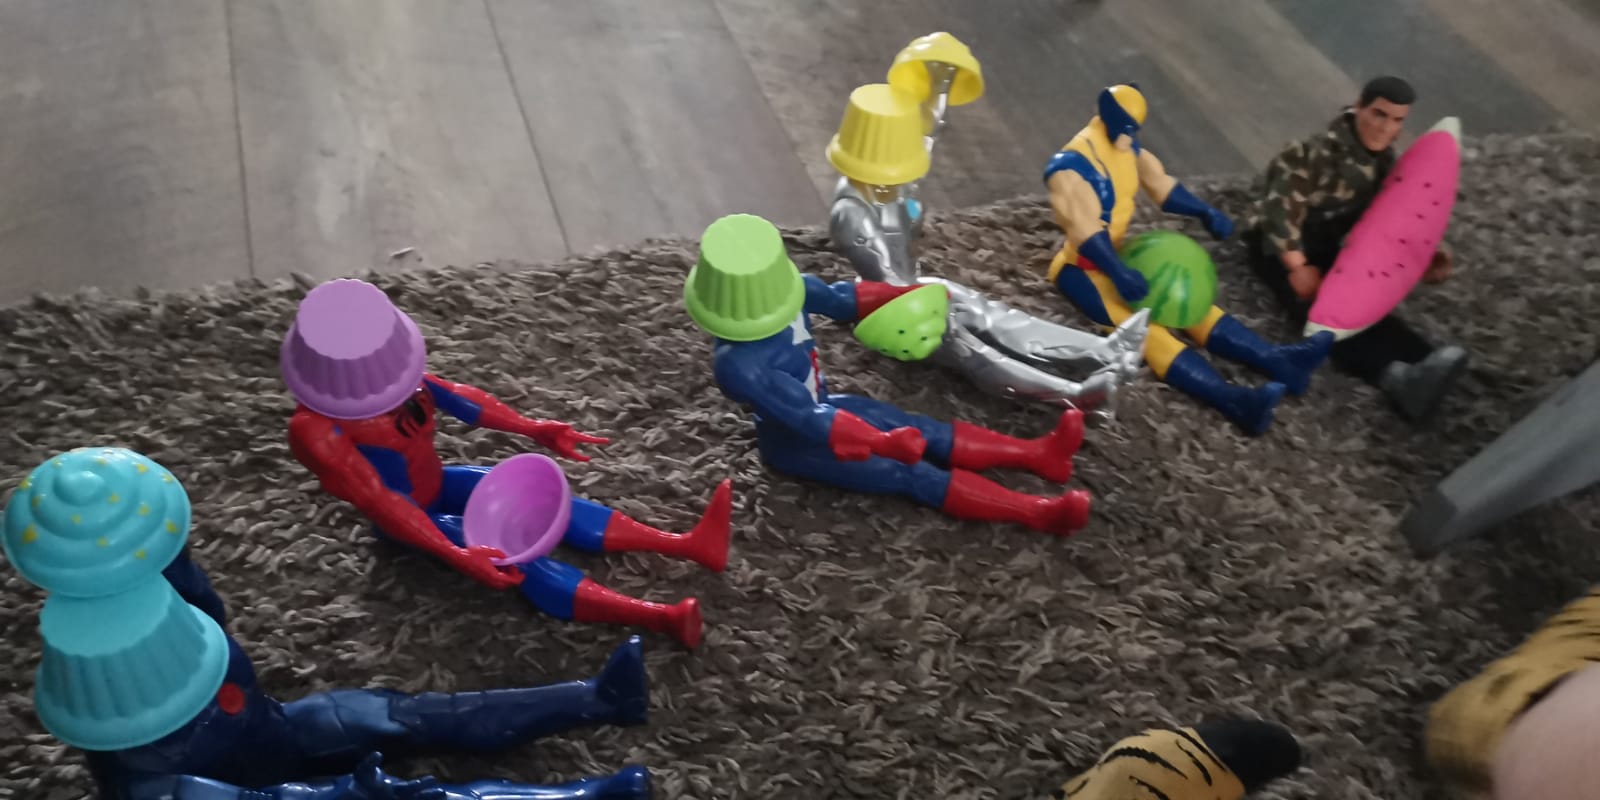 Image of toy superheroes with plastic cupcakes on their heads